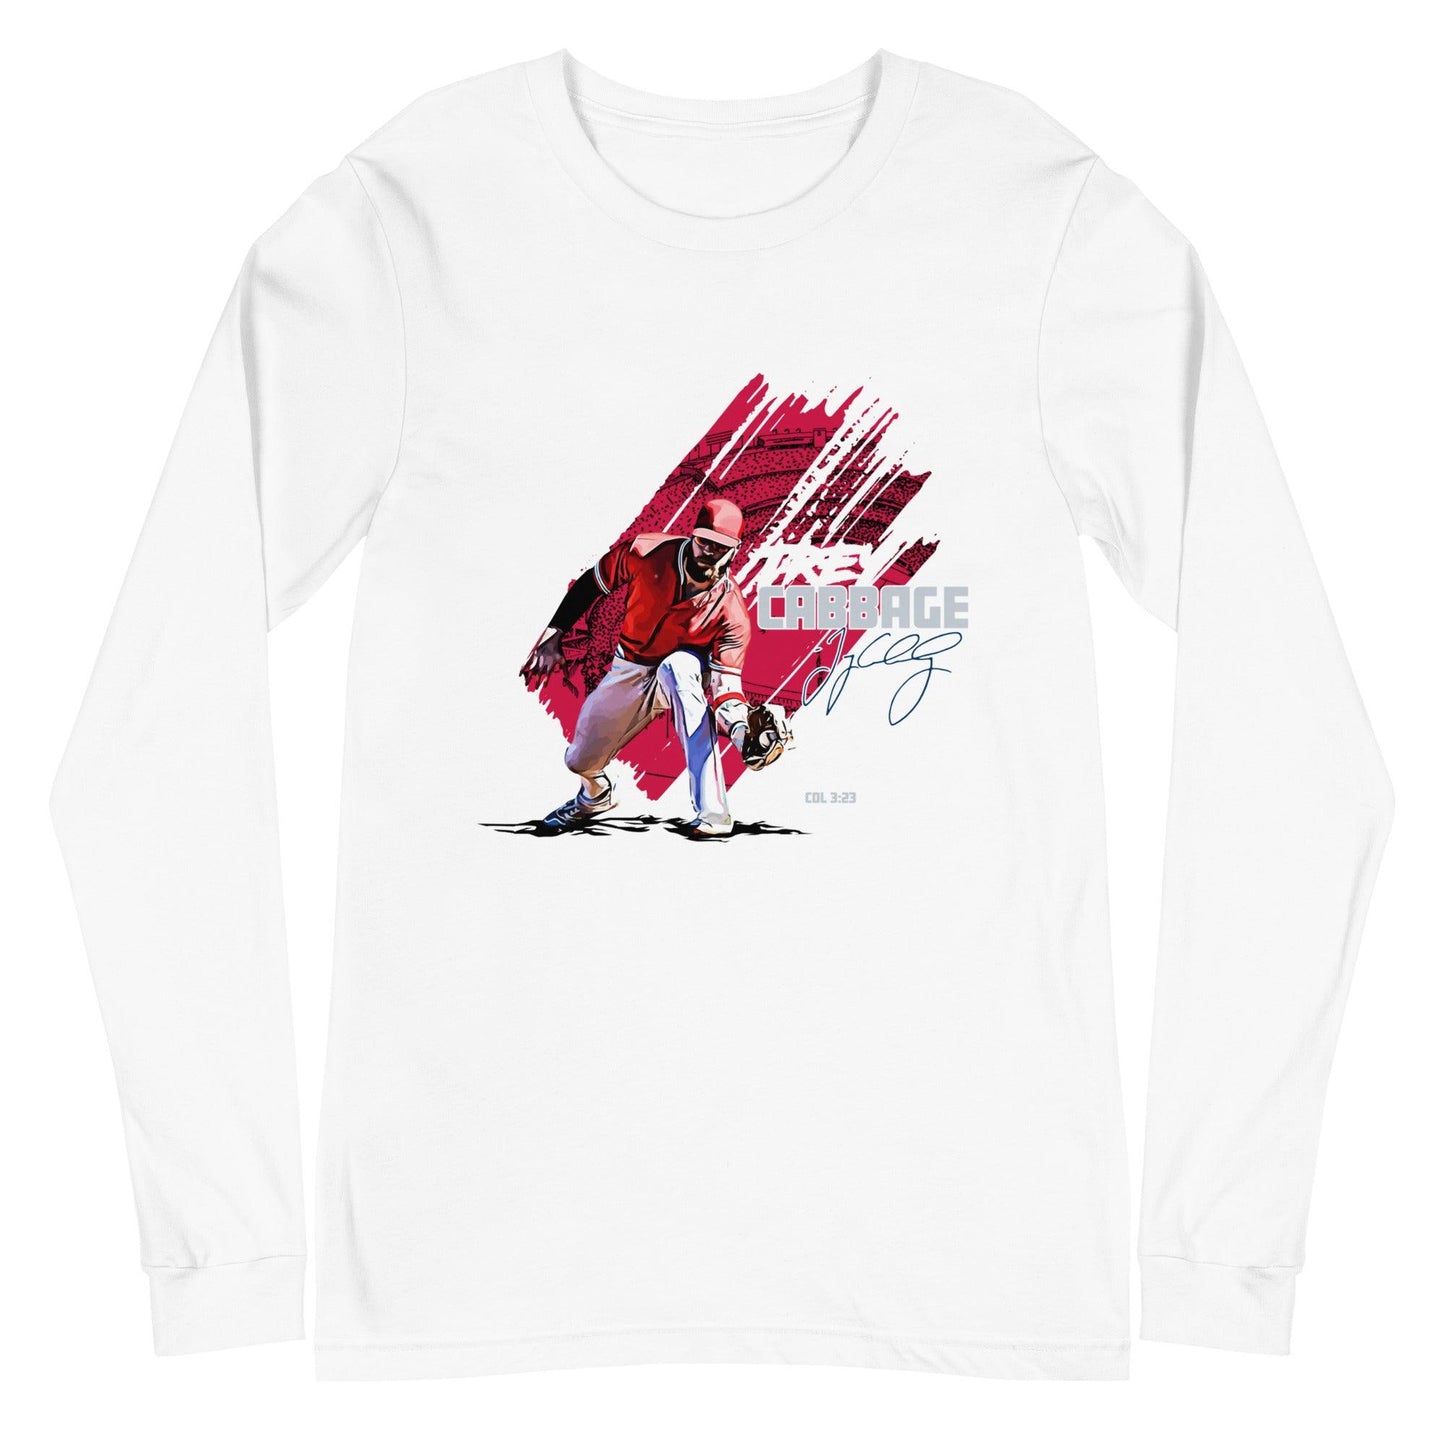 Trey Cabbage “Signature” Long Sleeve Tee - Fan Arch